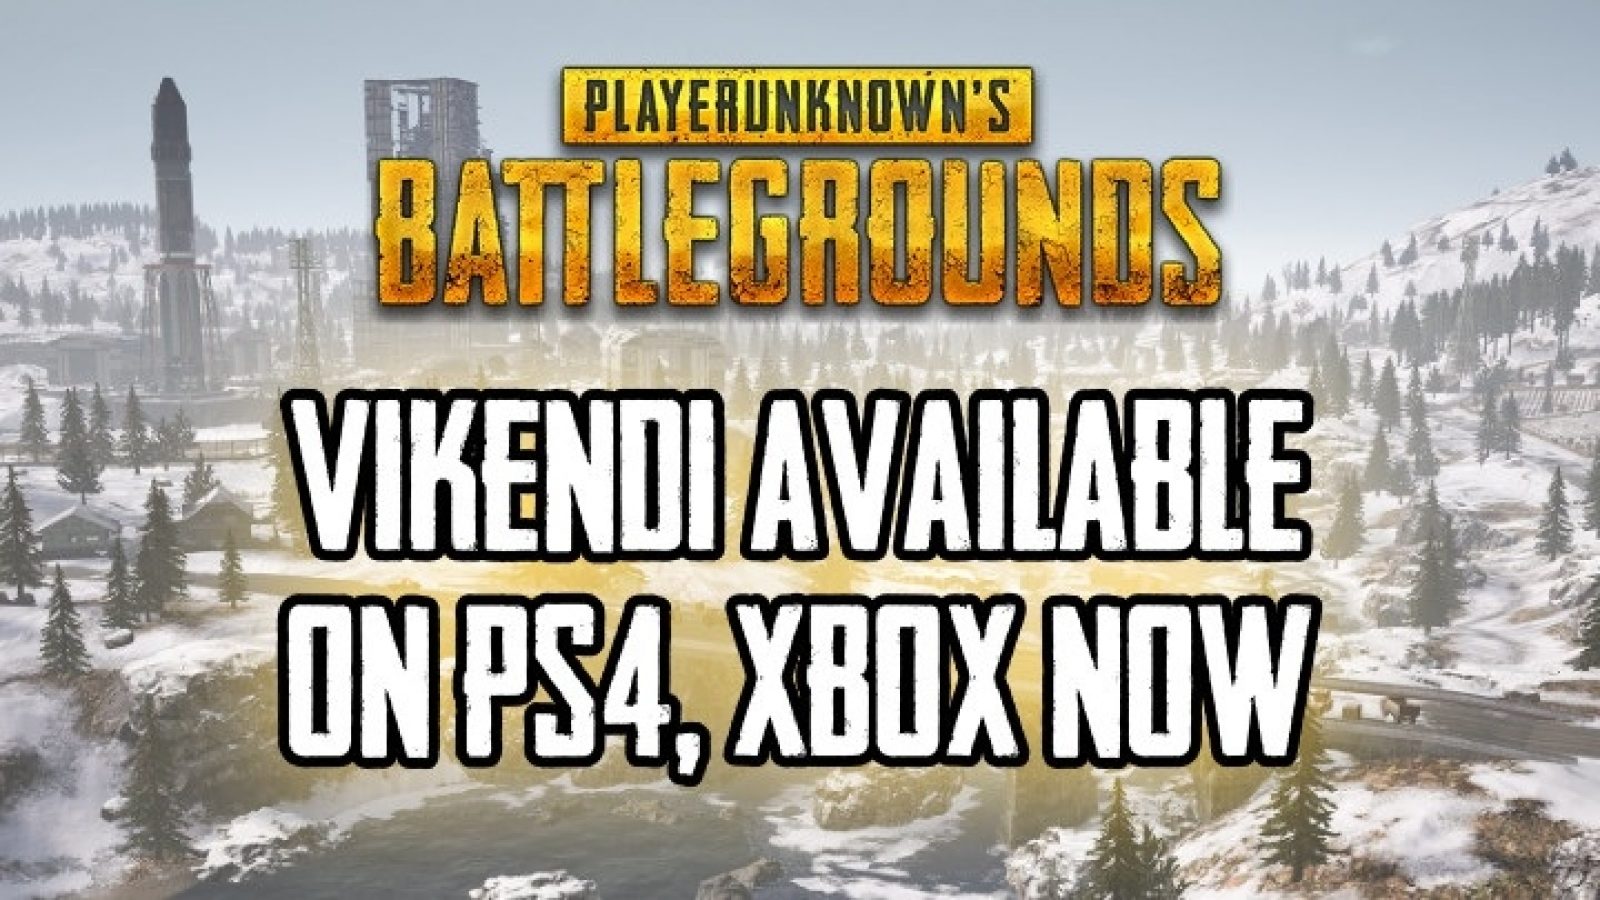 Vikendi the pubg snow map available on ps xbox now